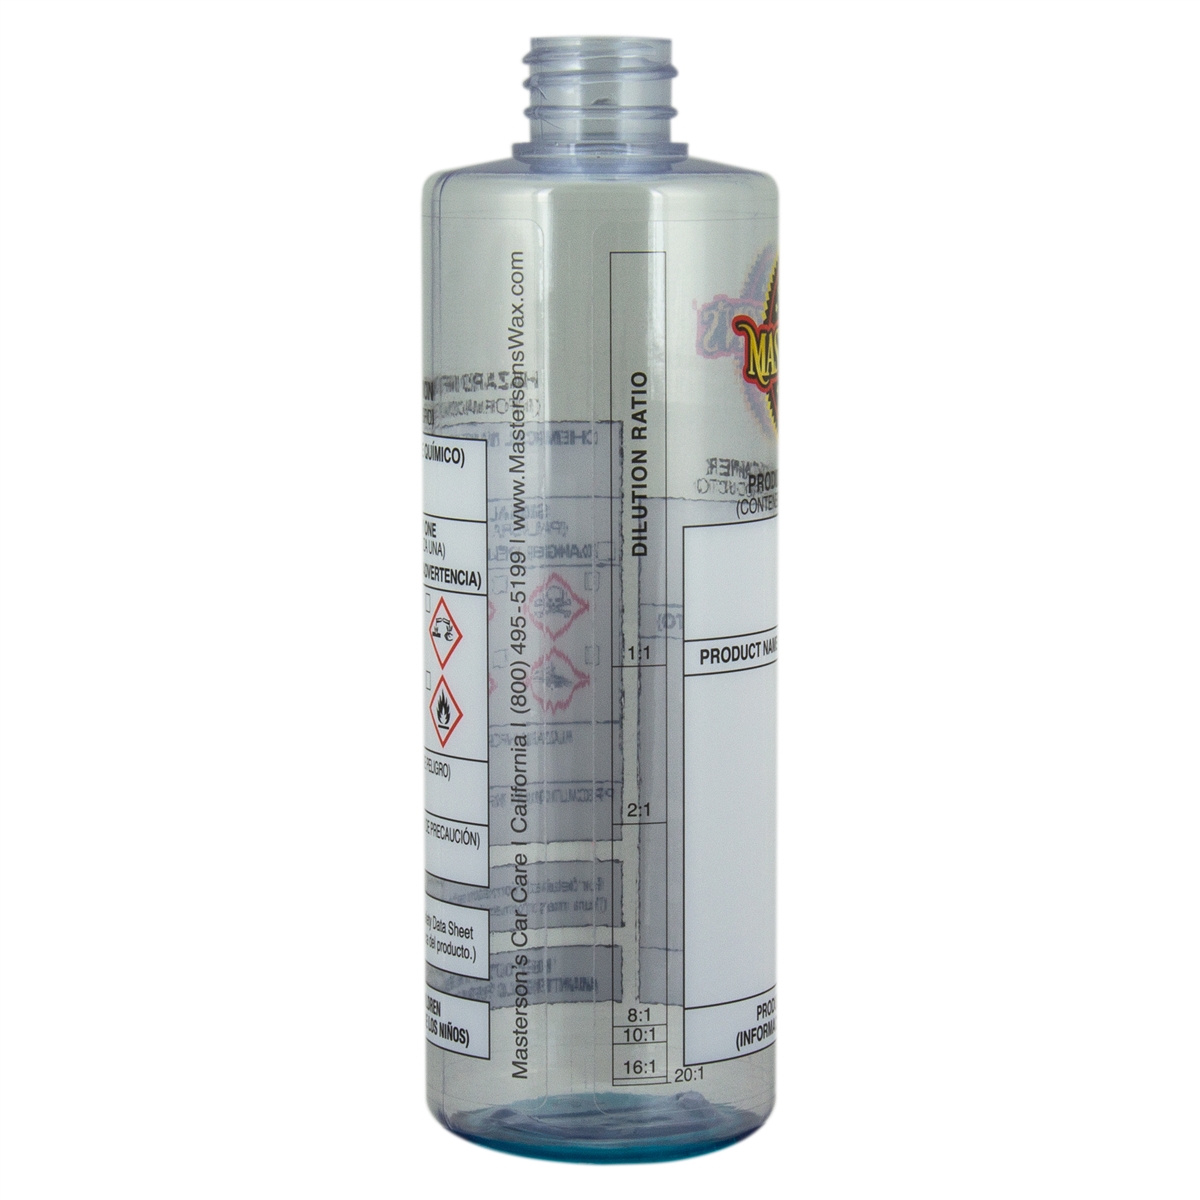 PRODUCT CONTAINER DILUTION BOTTLE 16 oz - AC_147_1